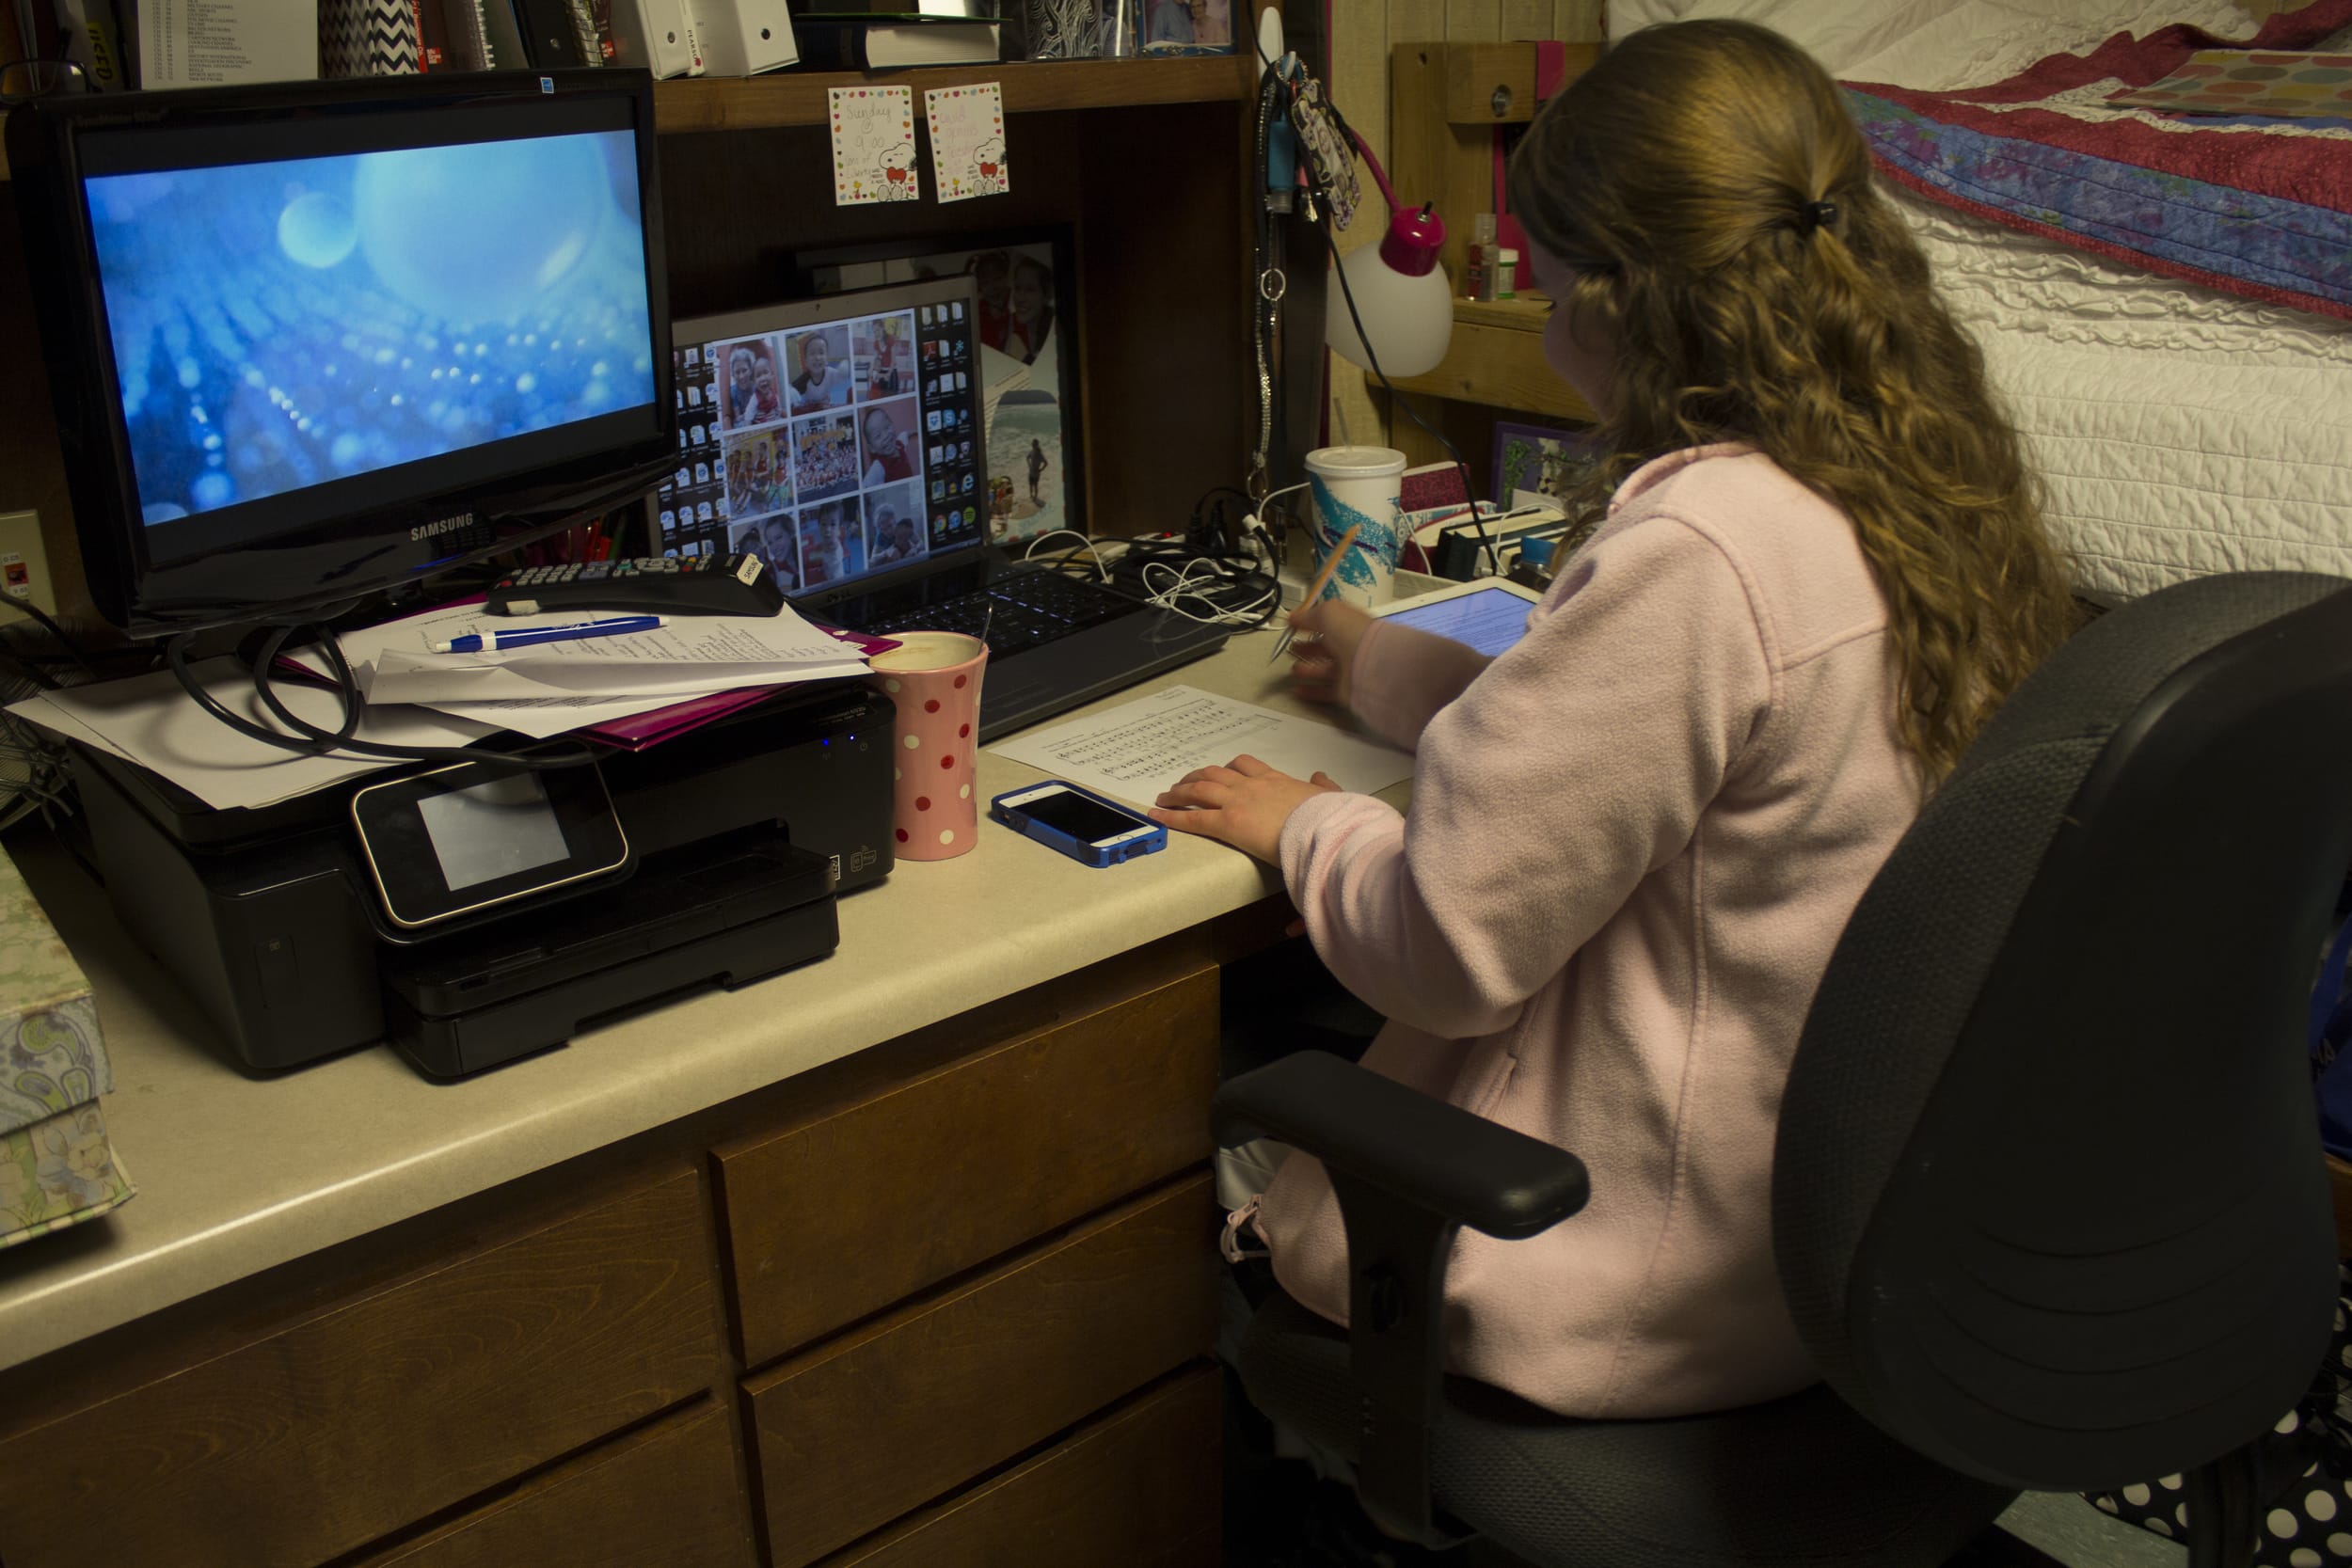  Sophomore Marianne Woodard enjoys the peace and solitude of her dorm room to work on some homework while a few of her friends pop into her room during open dorms. 